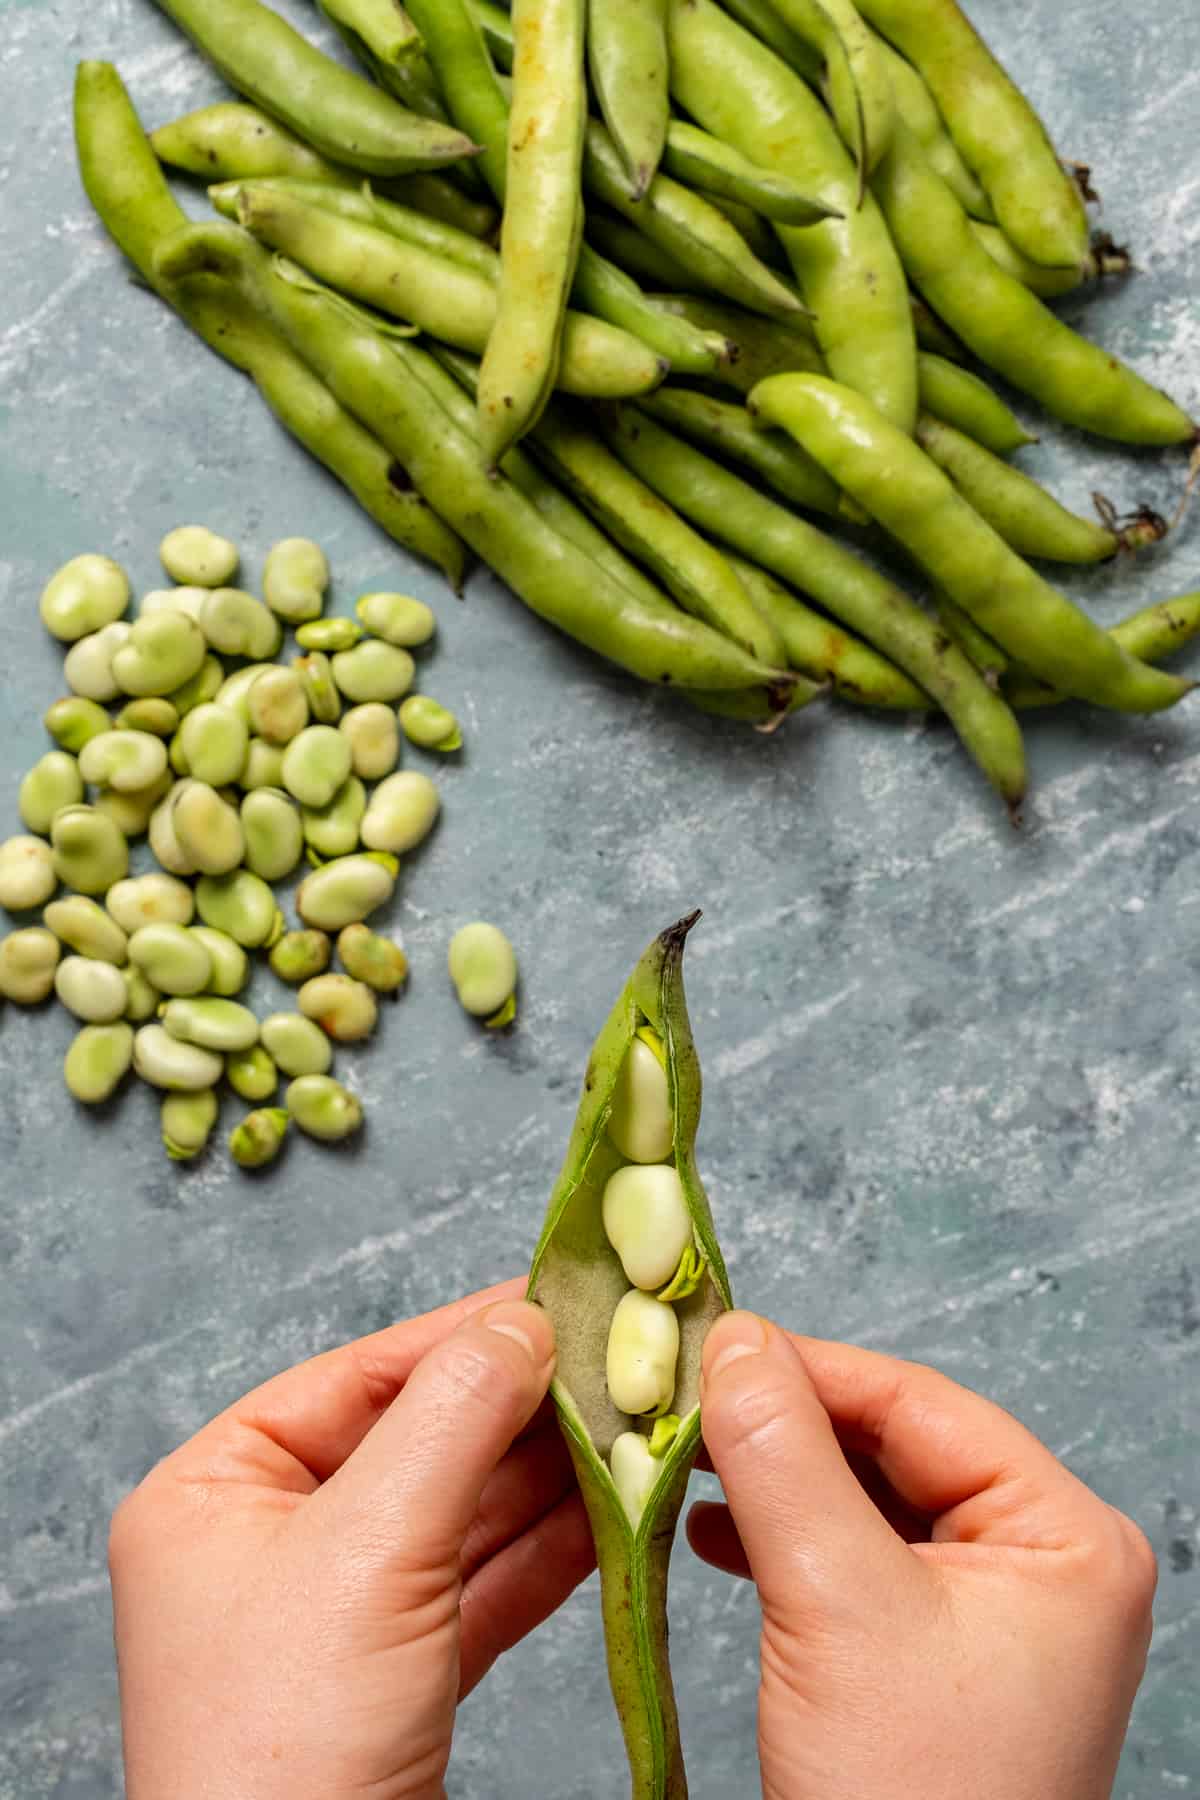 Hands removing fava beans from their pods.